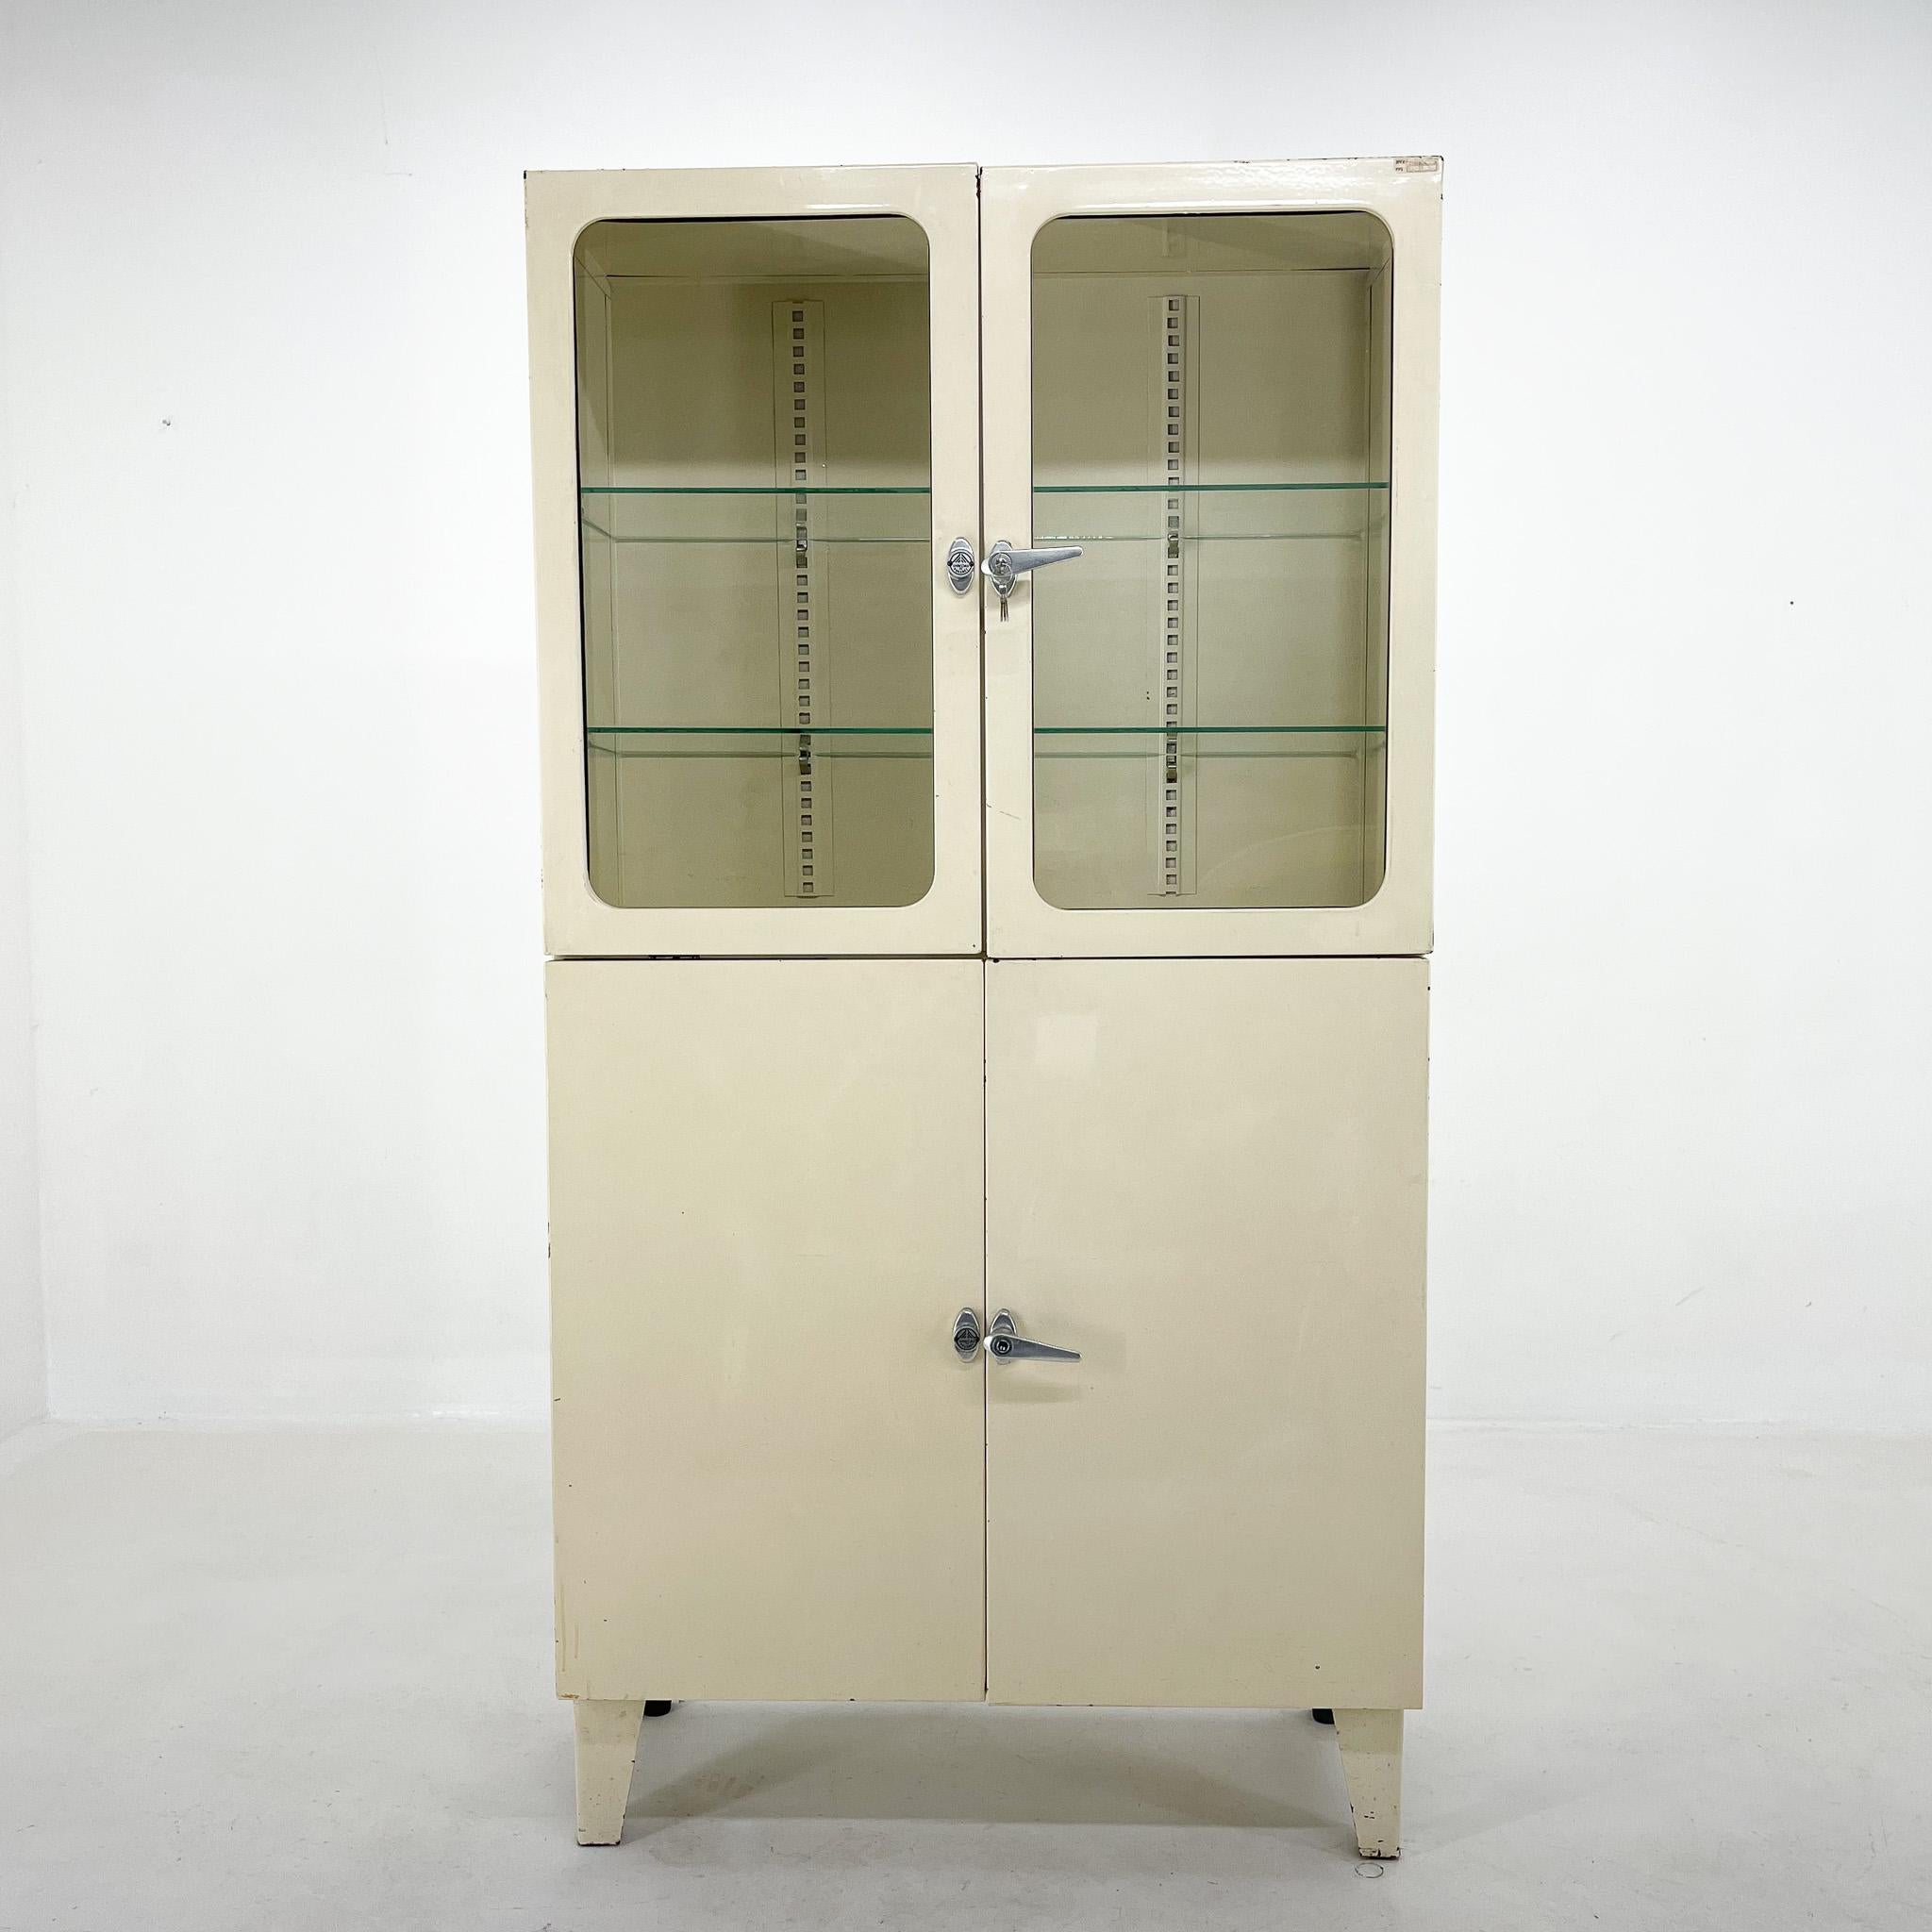 1950s metal kitchen cabinets for sale